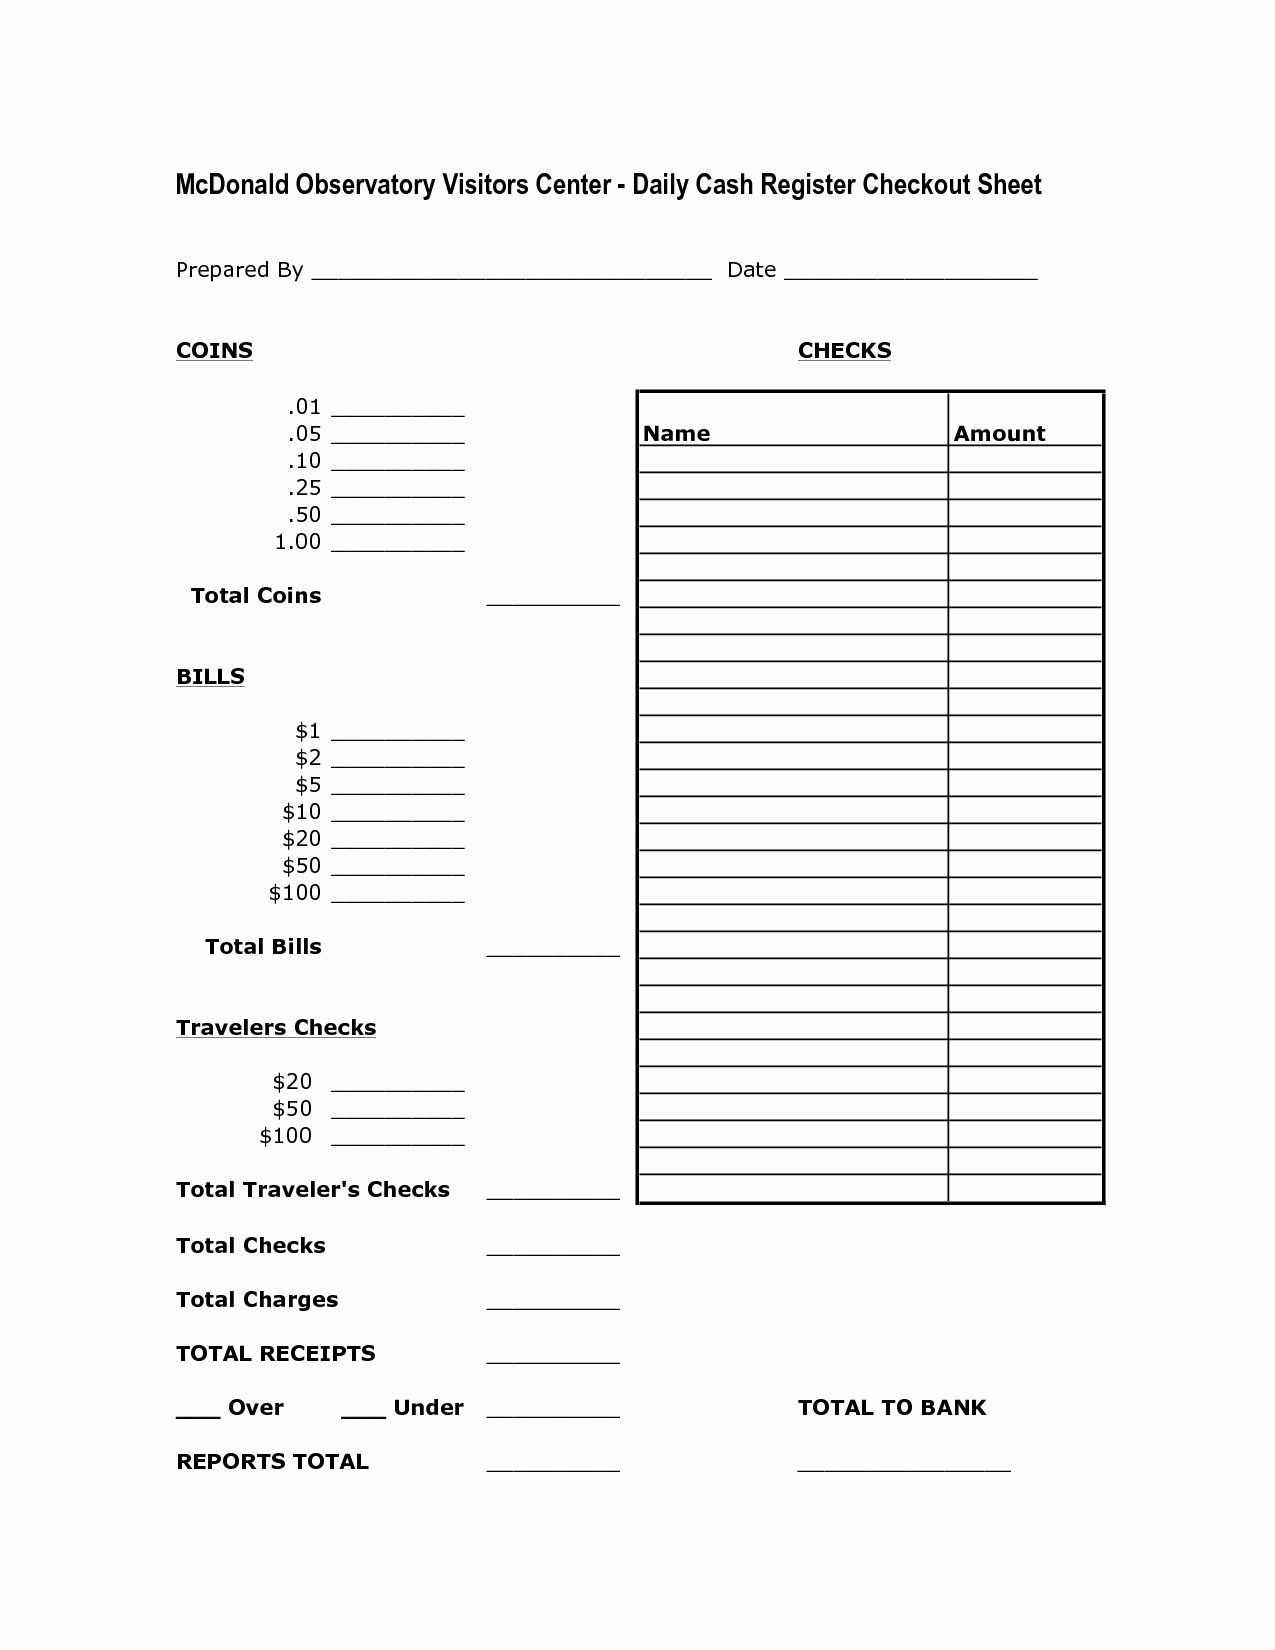 Cash Drawer Count Sheet Template Best Of Cash Drawer Count Sheet Template